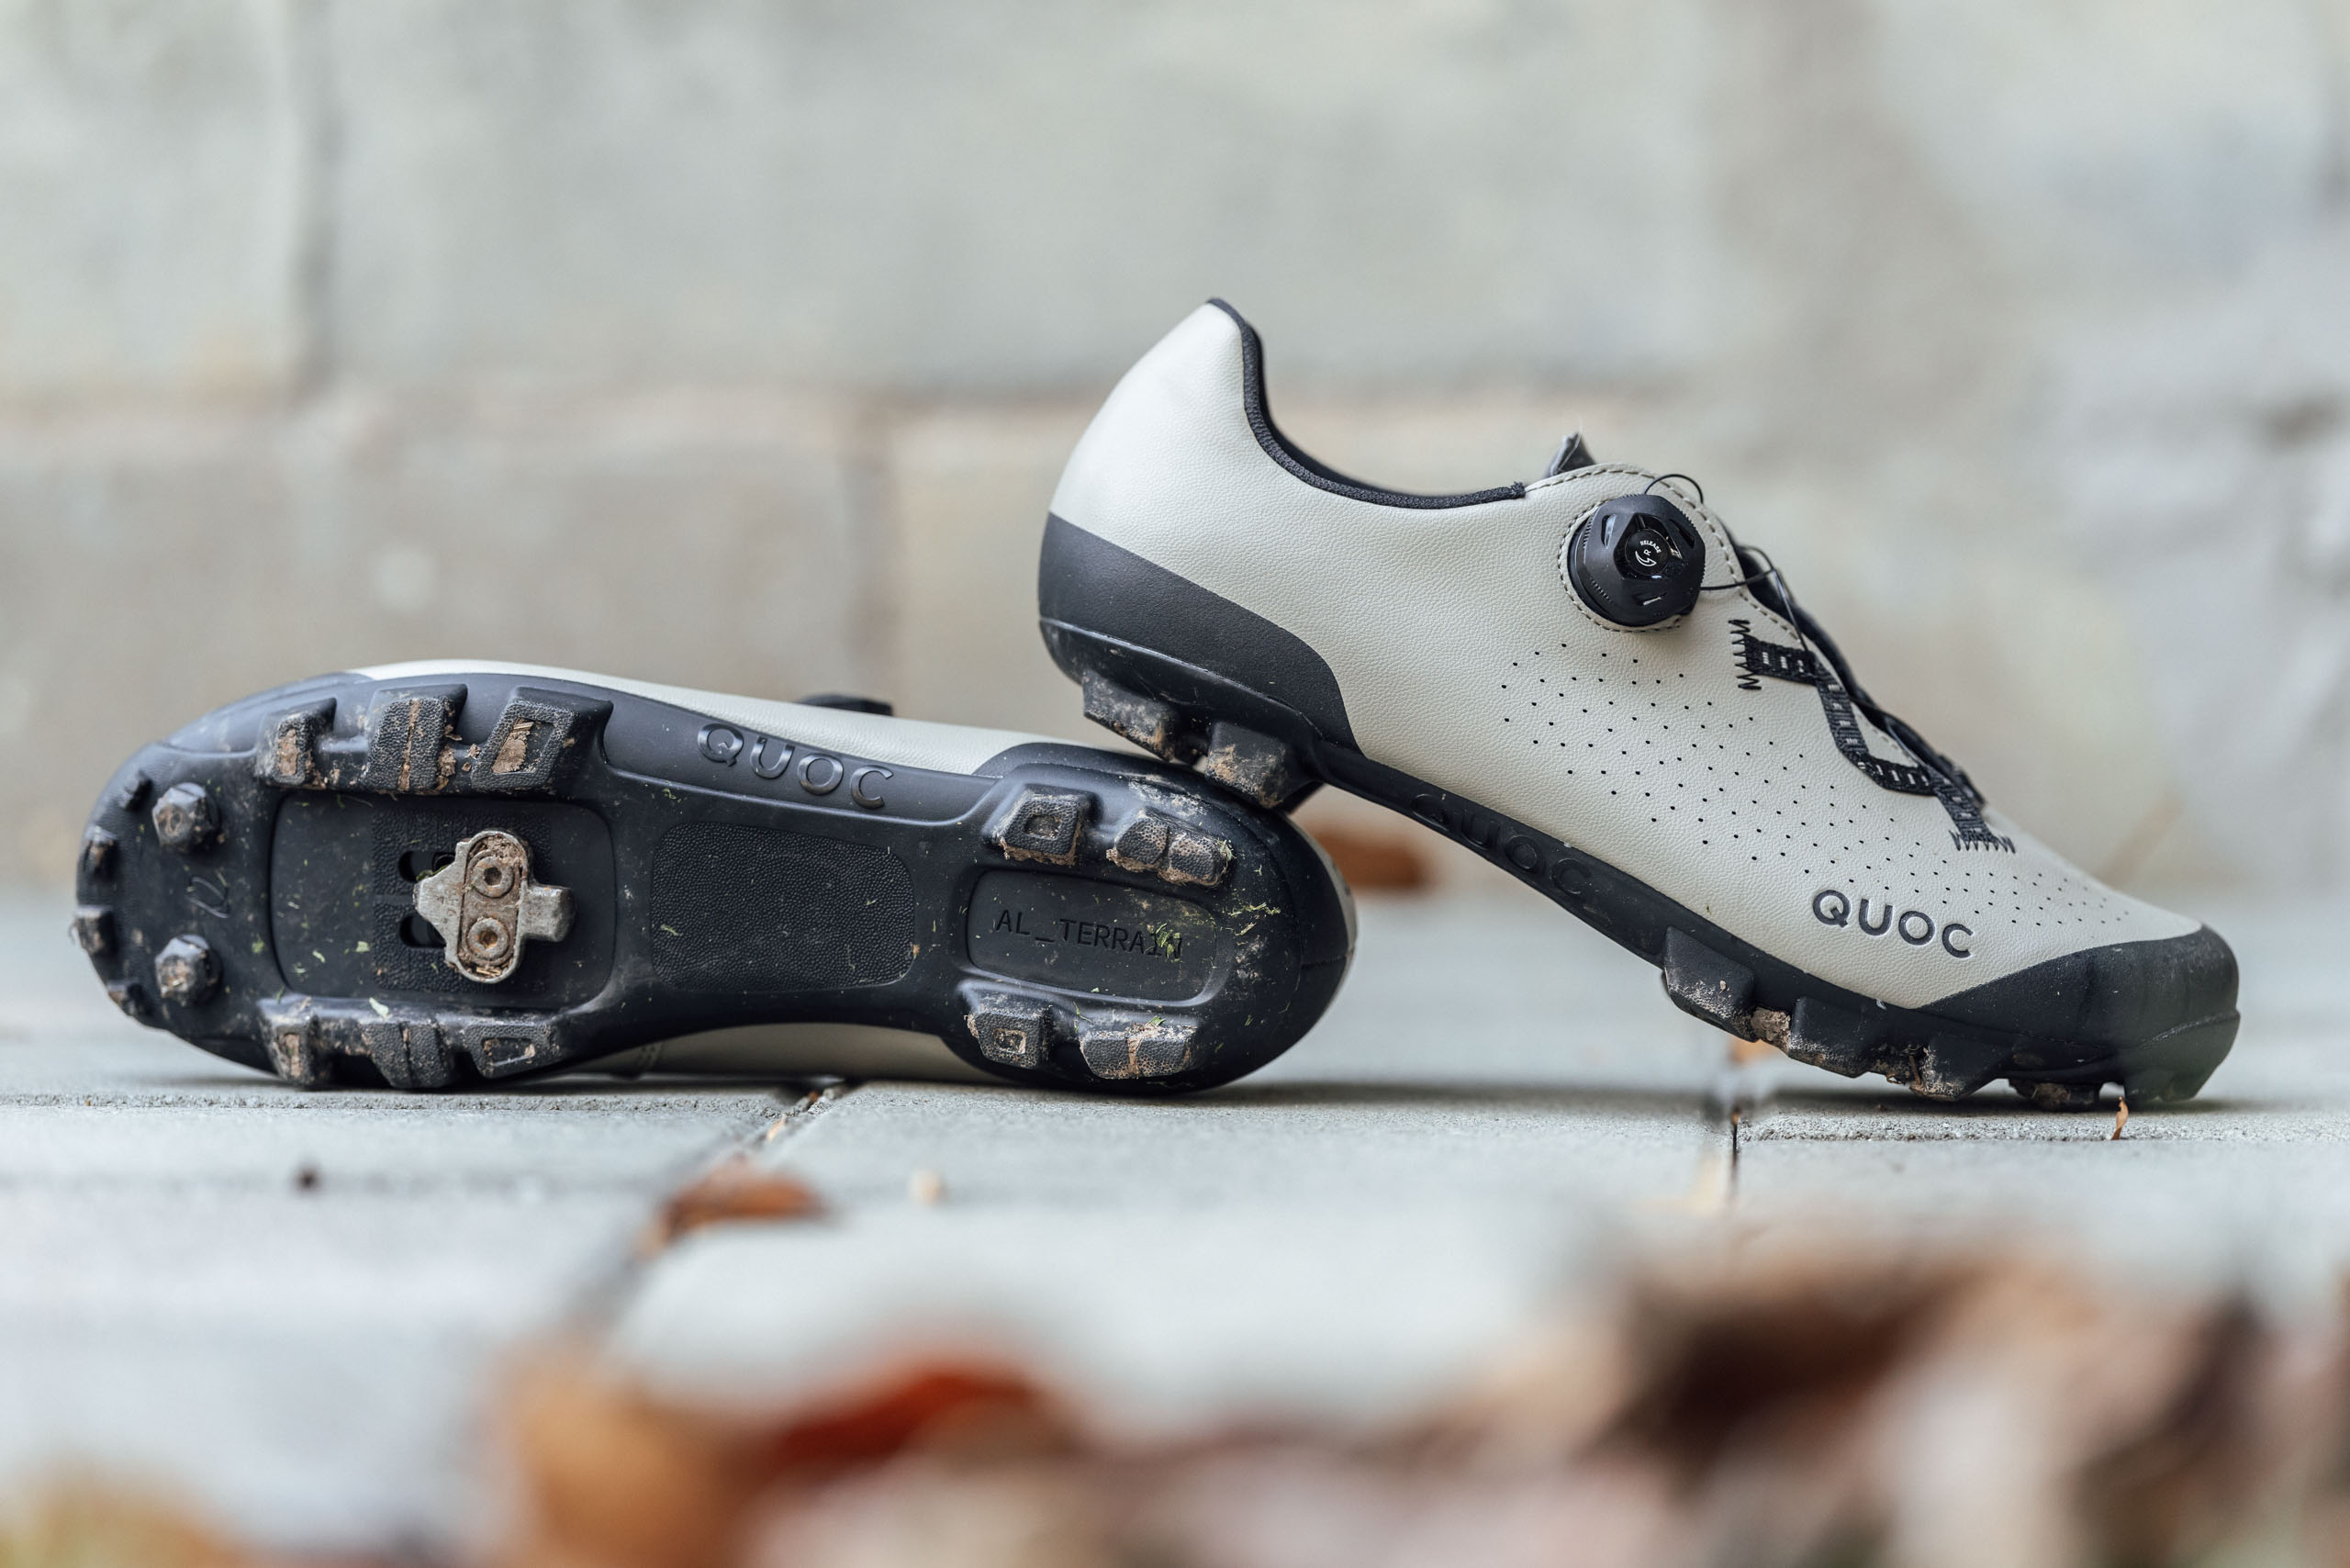 Cycling Shoes - Over The Edge